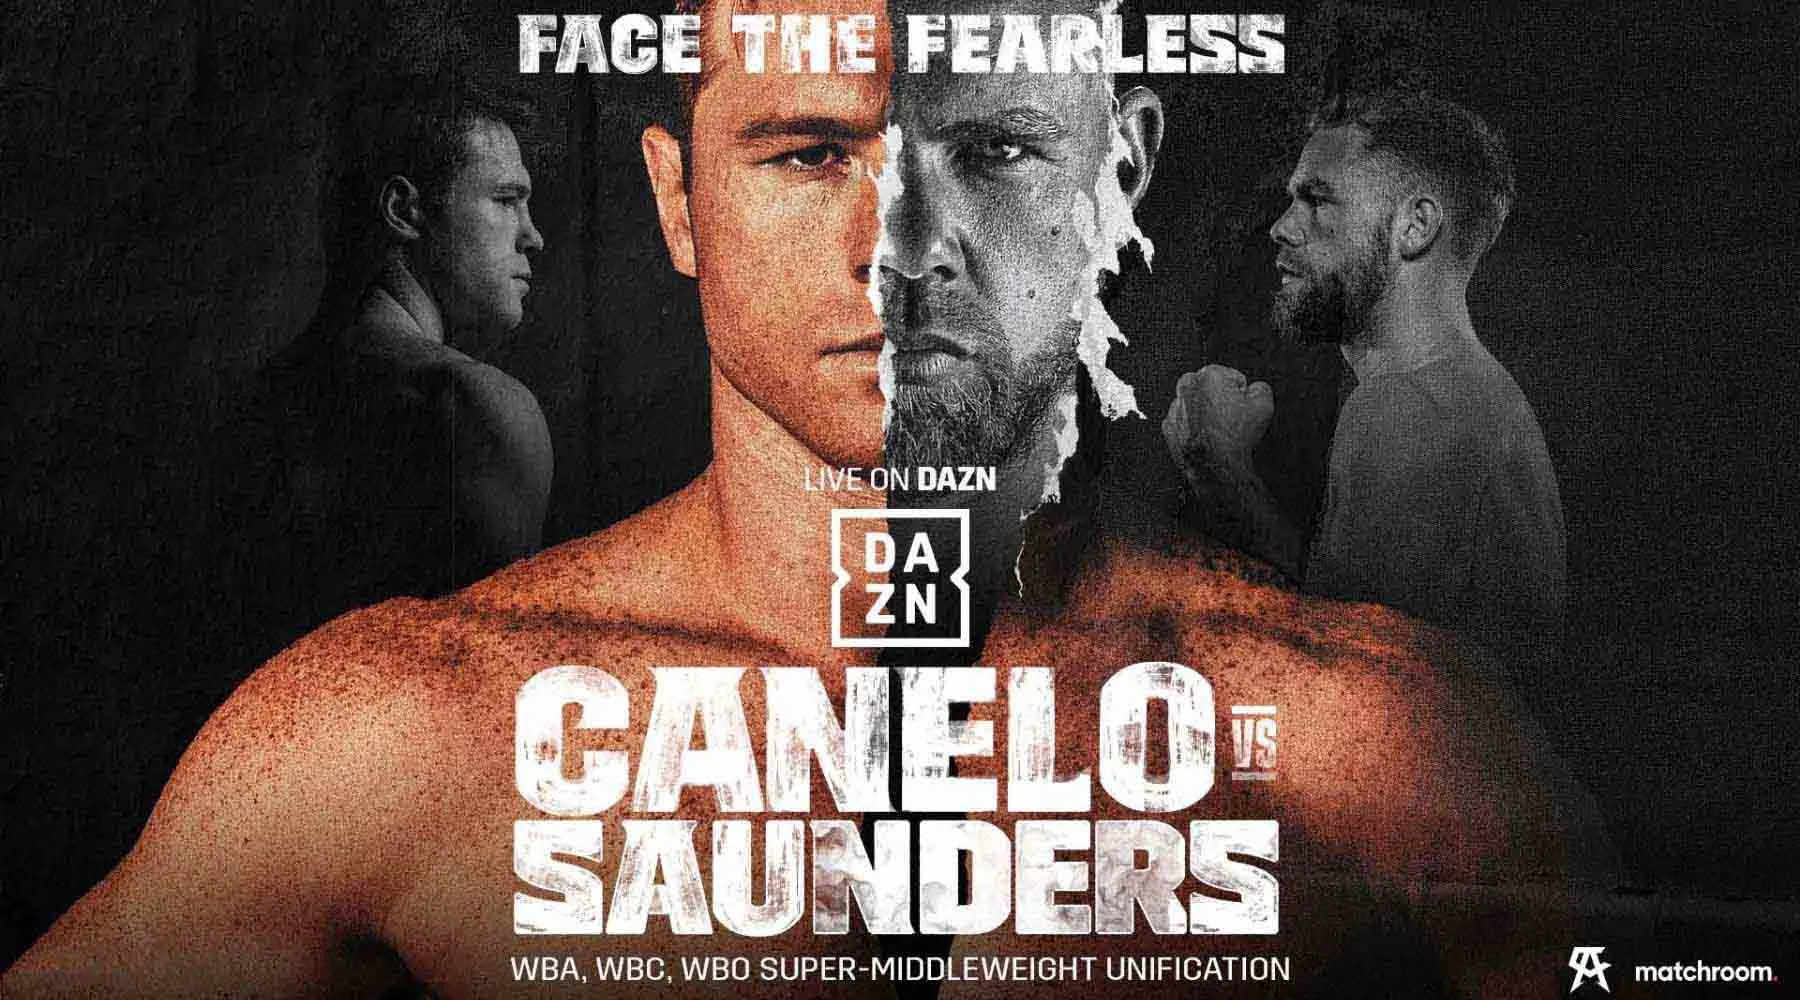 Watch Canelo vs Saunders boxing live in Australia and start time